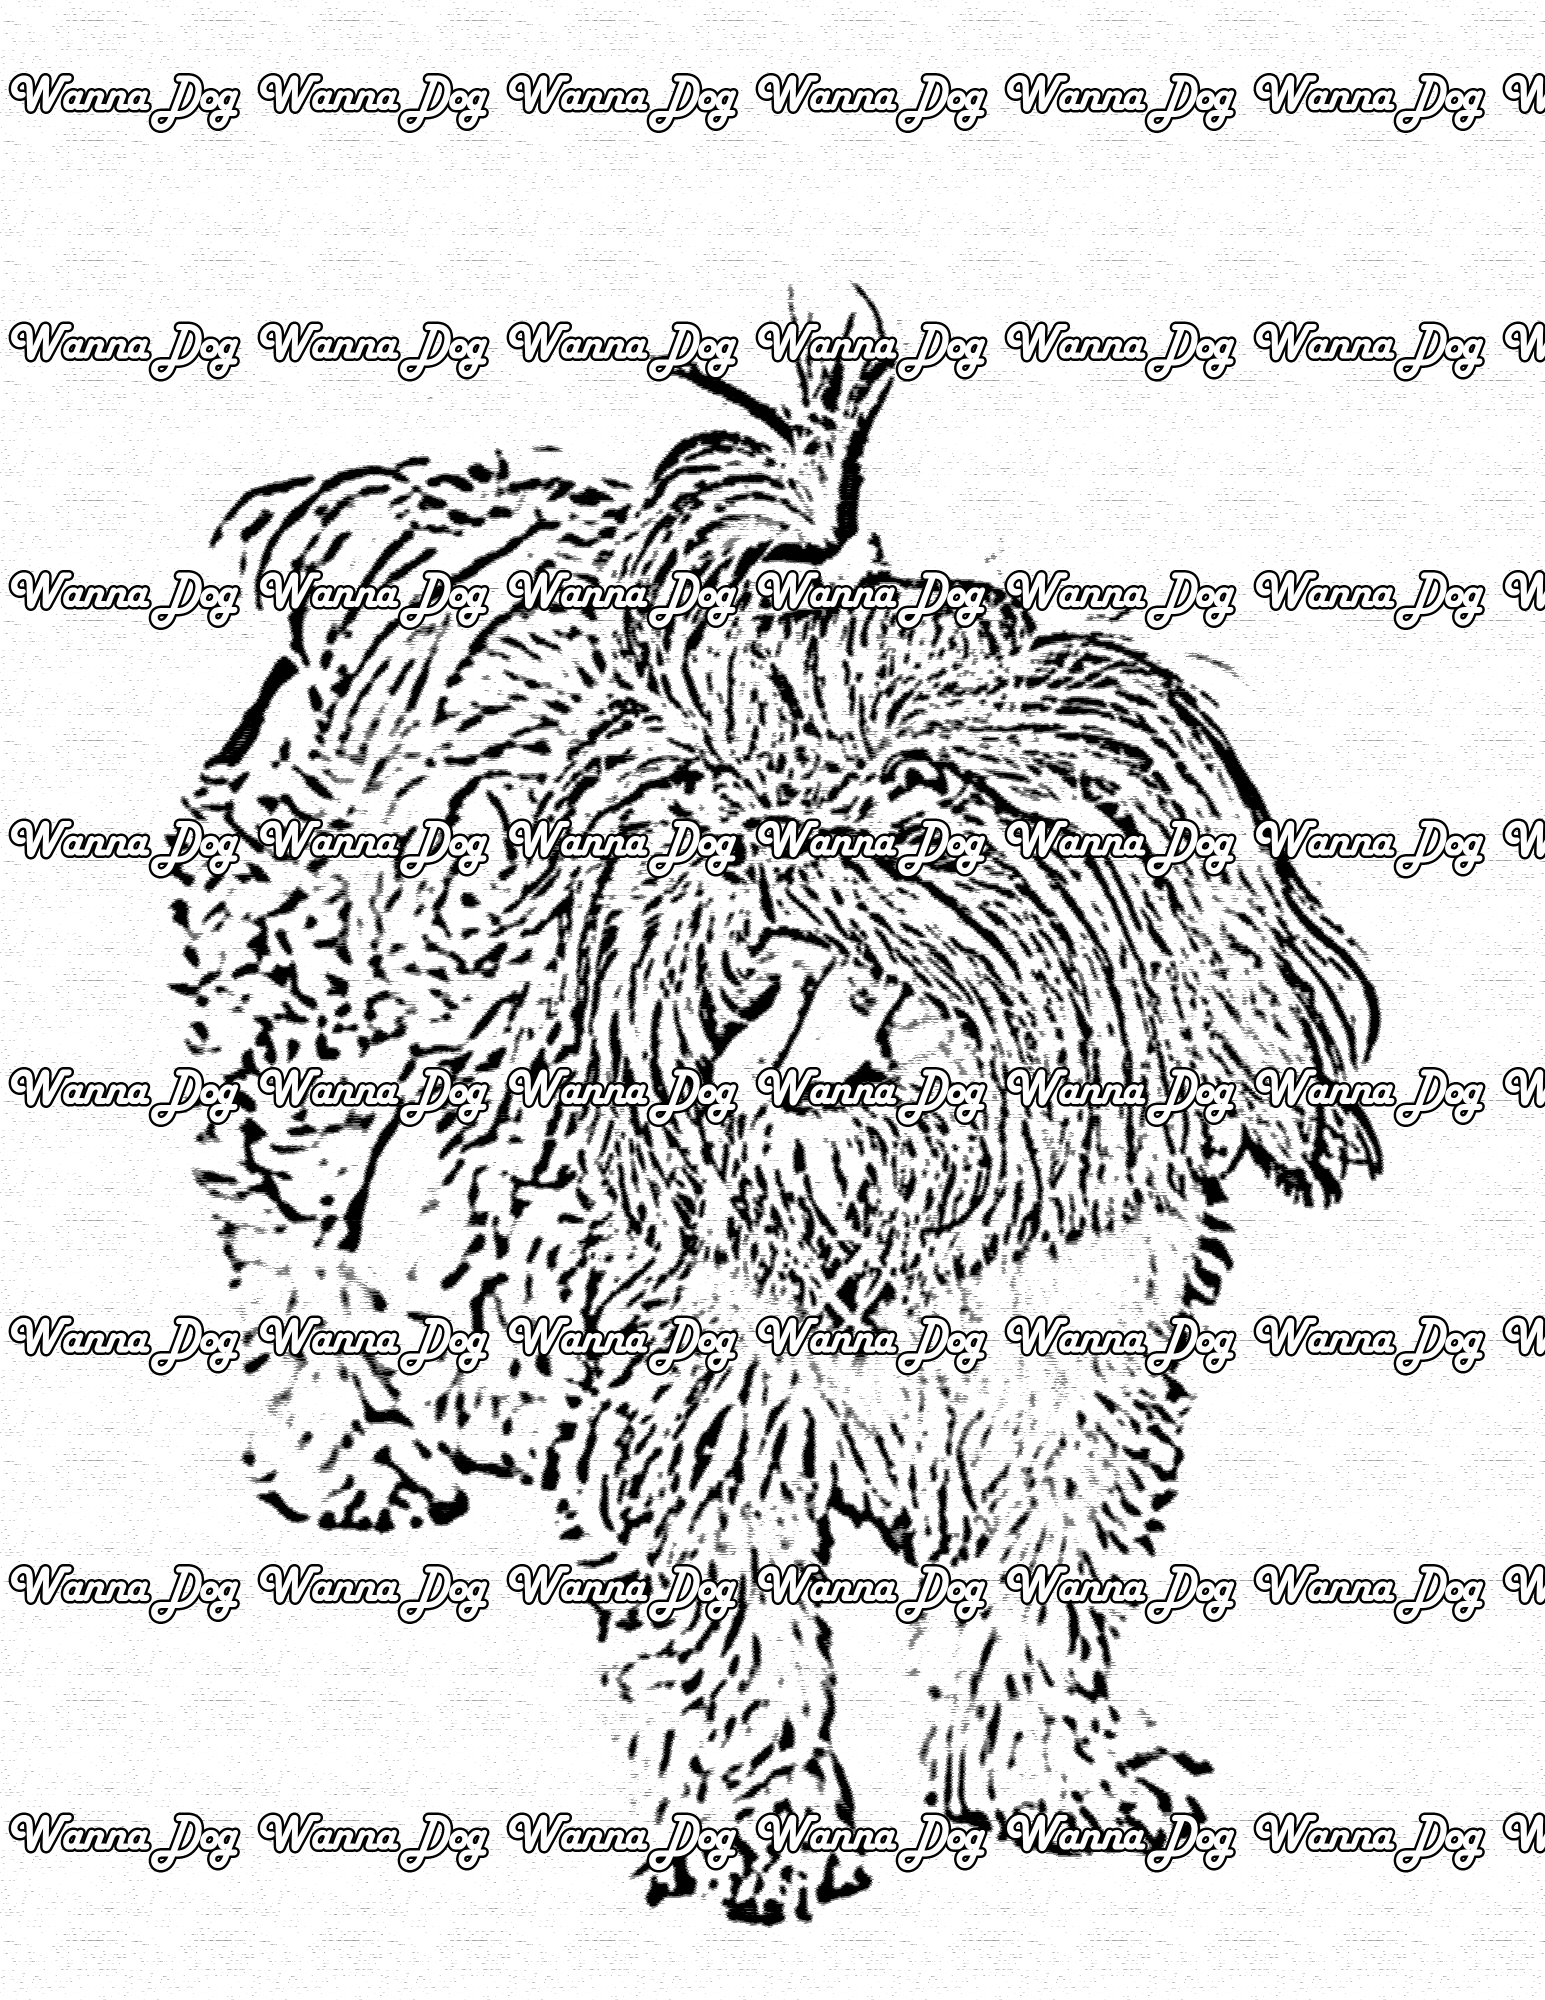 Shih Tzu Coloring Page of a Shih Tzu standing with their tongue out